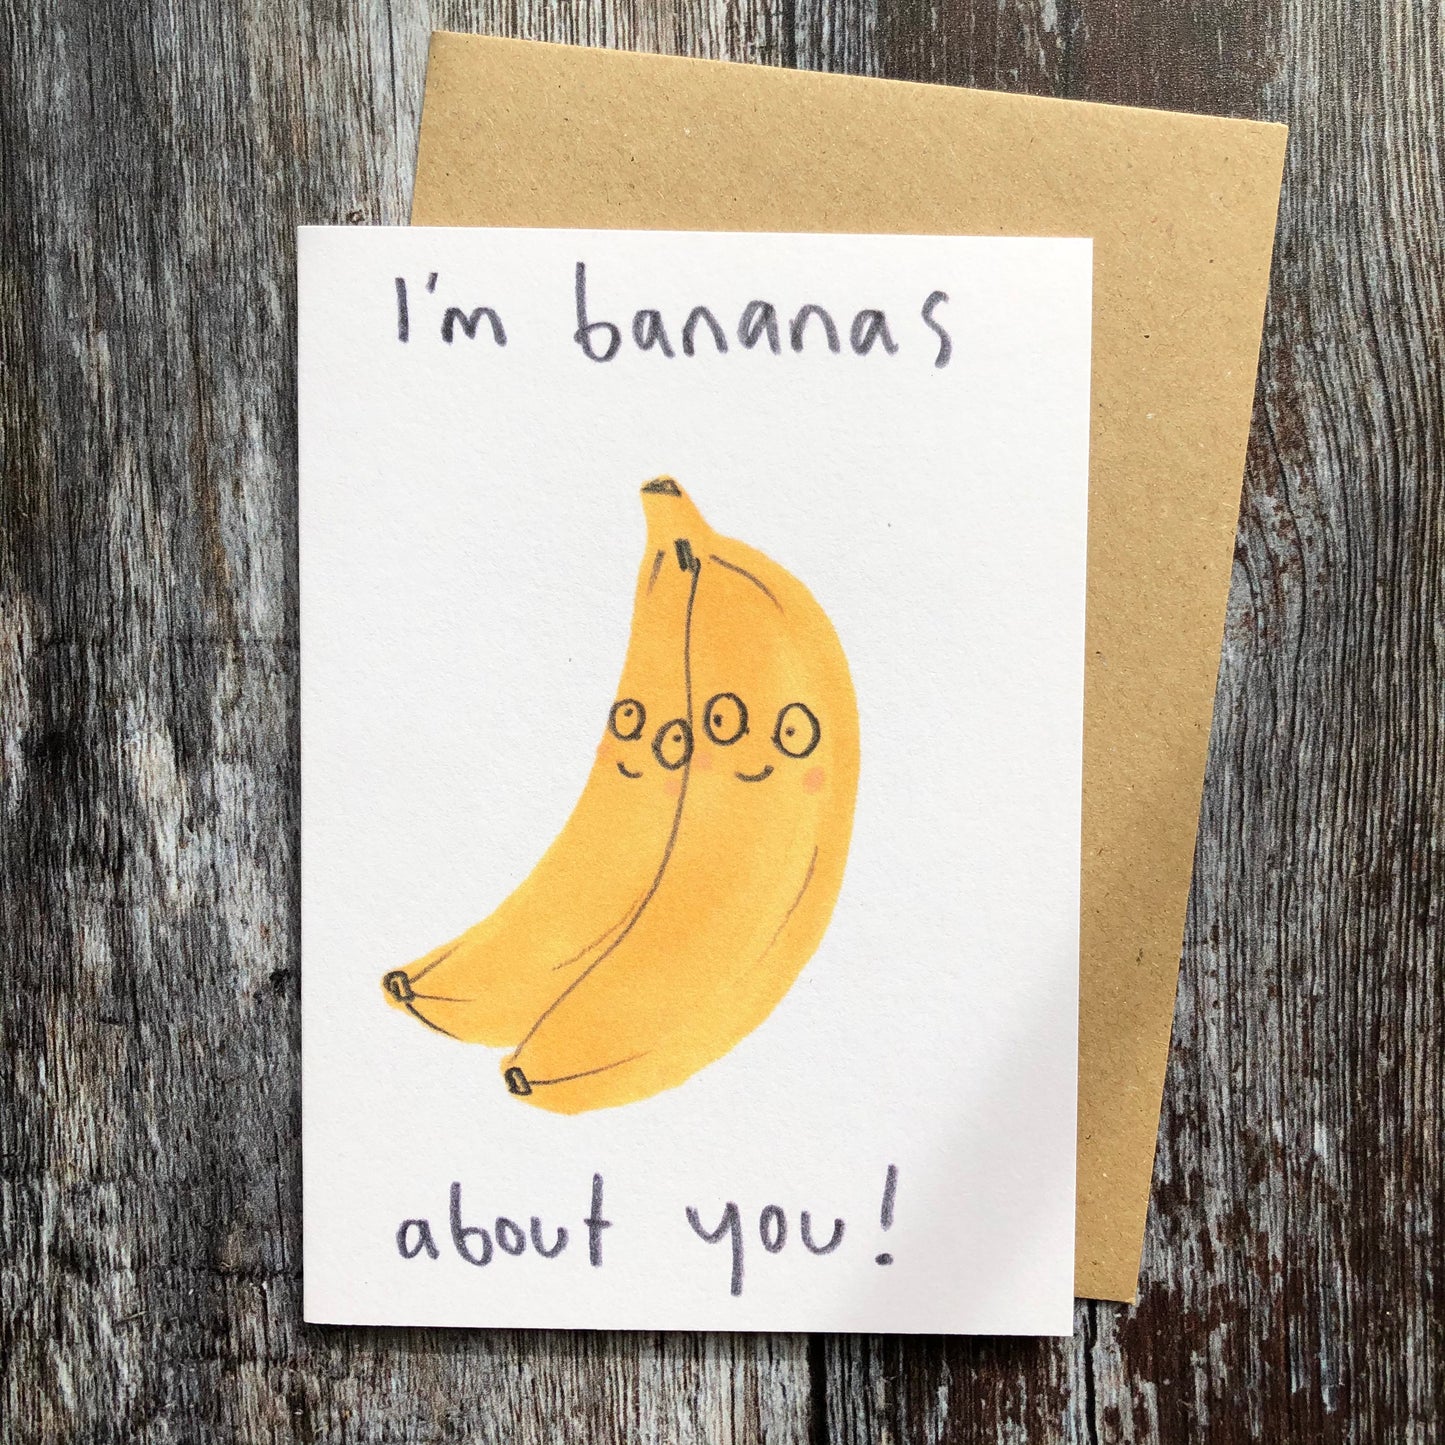 I'm Bananas about you, Love Fruit and Veg 872